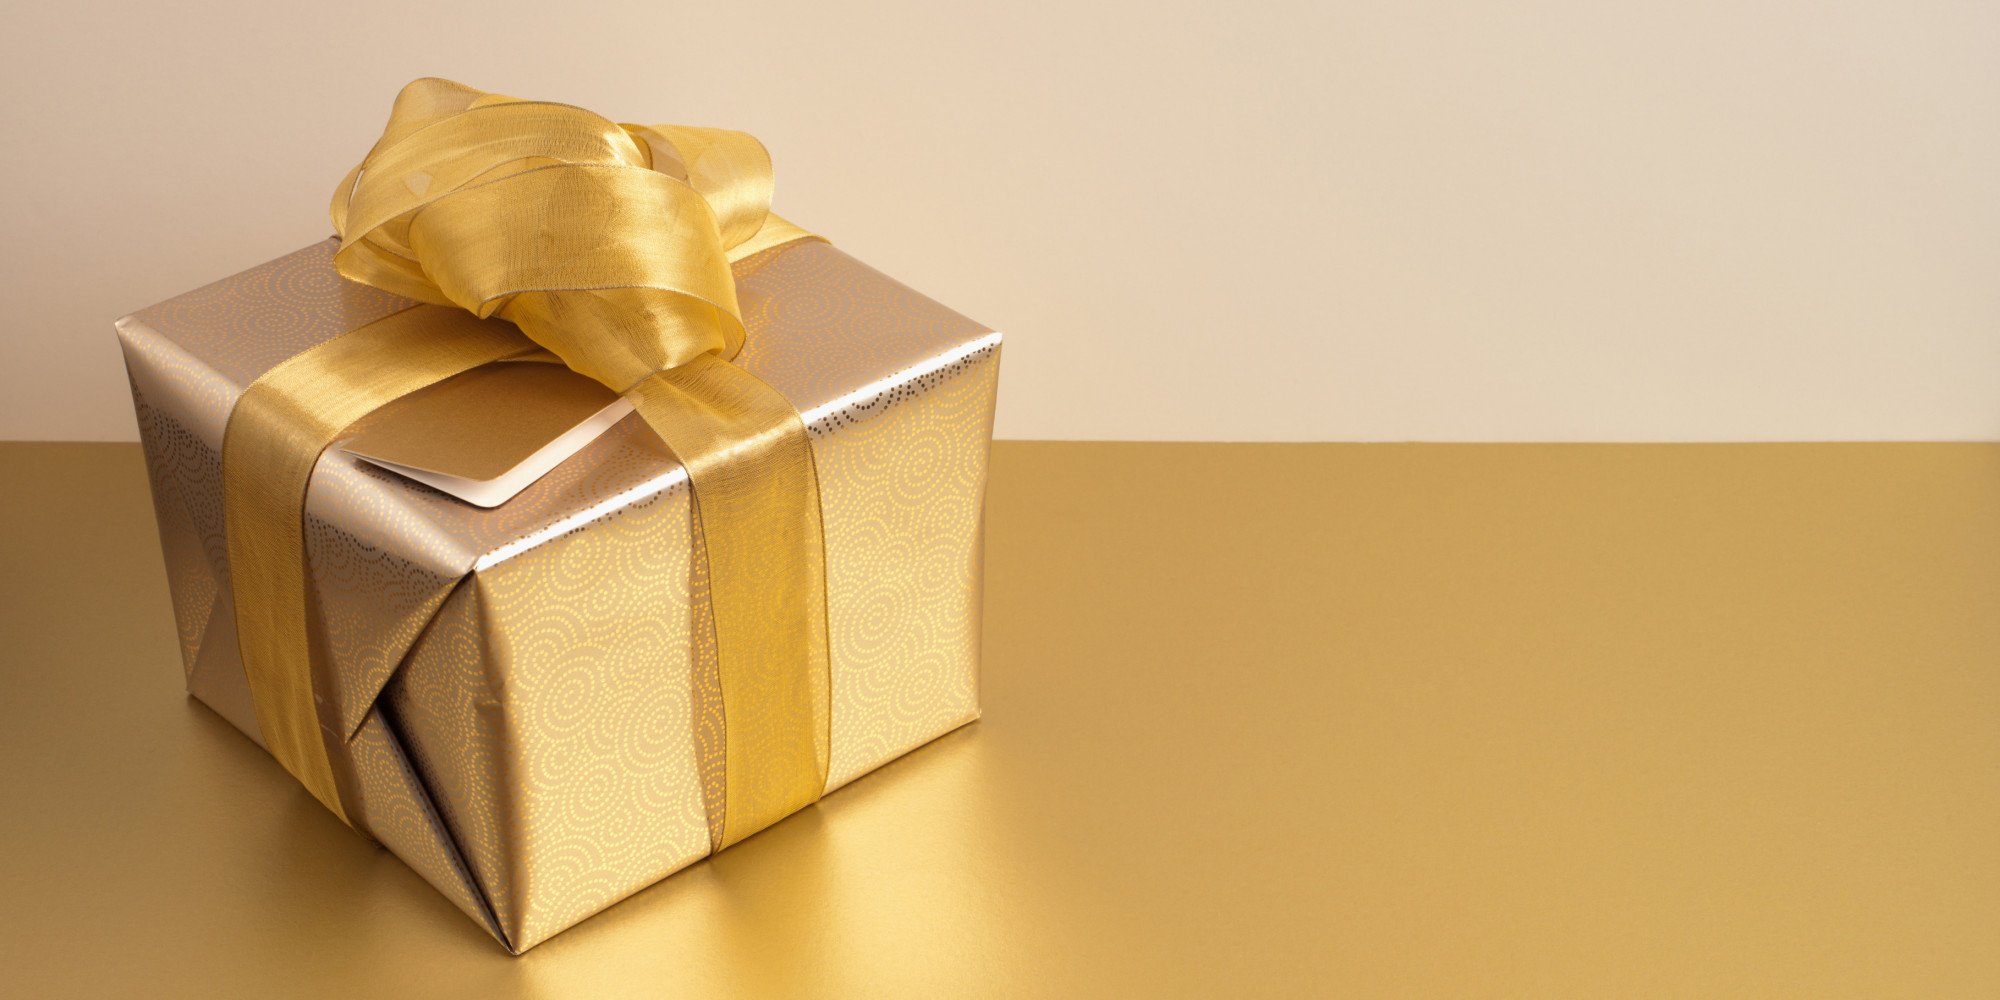 Quick Yet Thoughtful Gift Ideas | HuffPost
